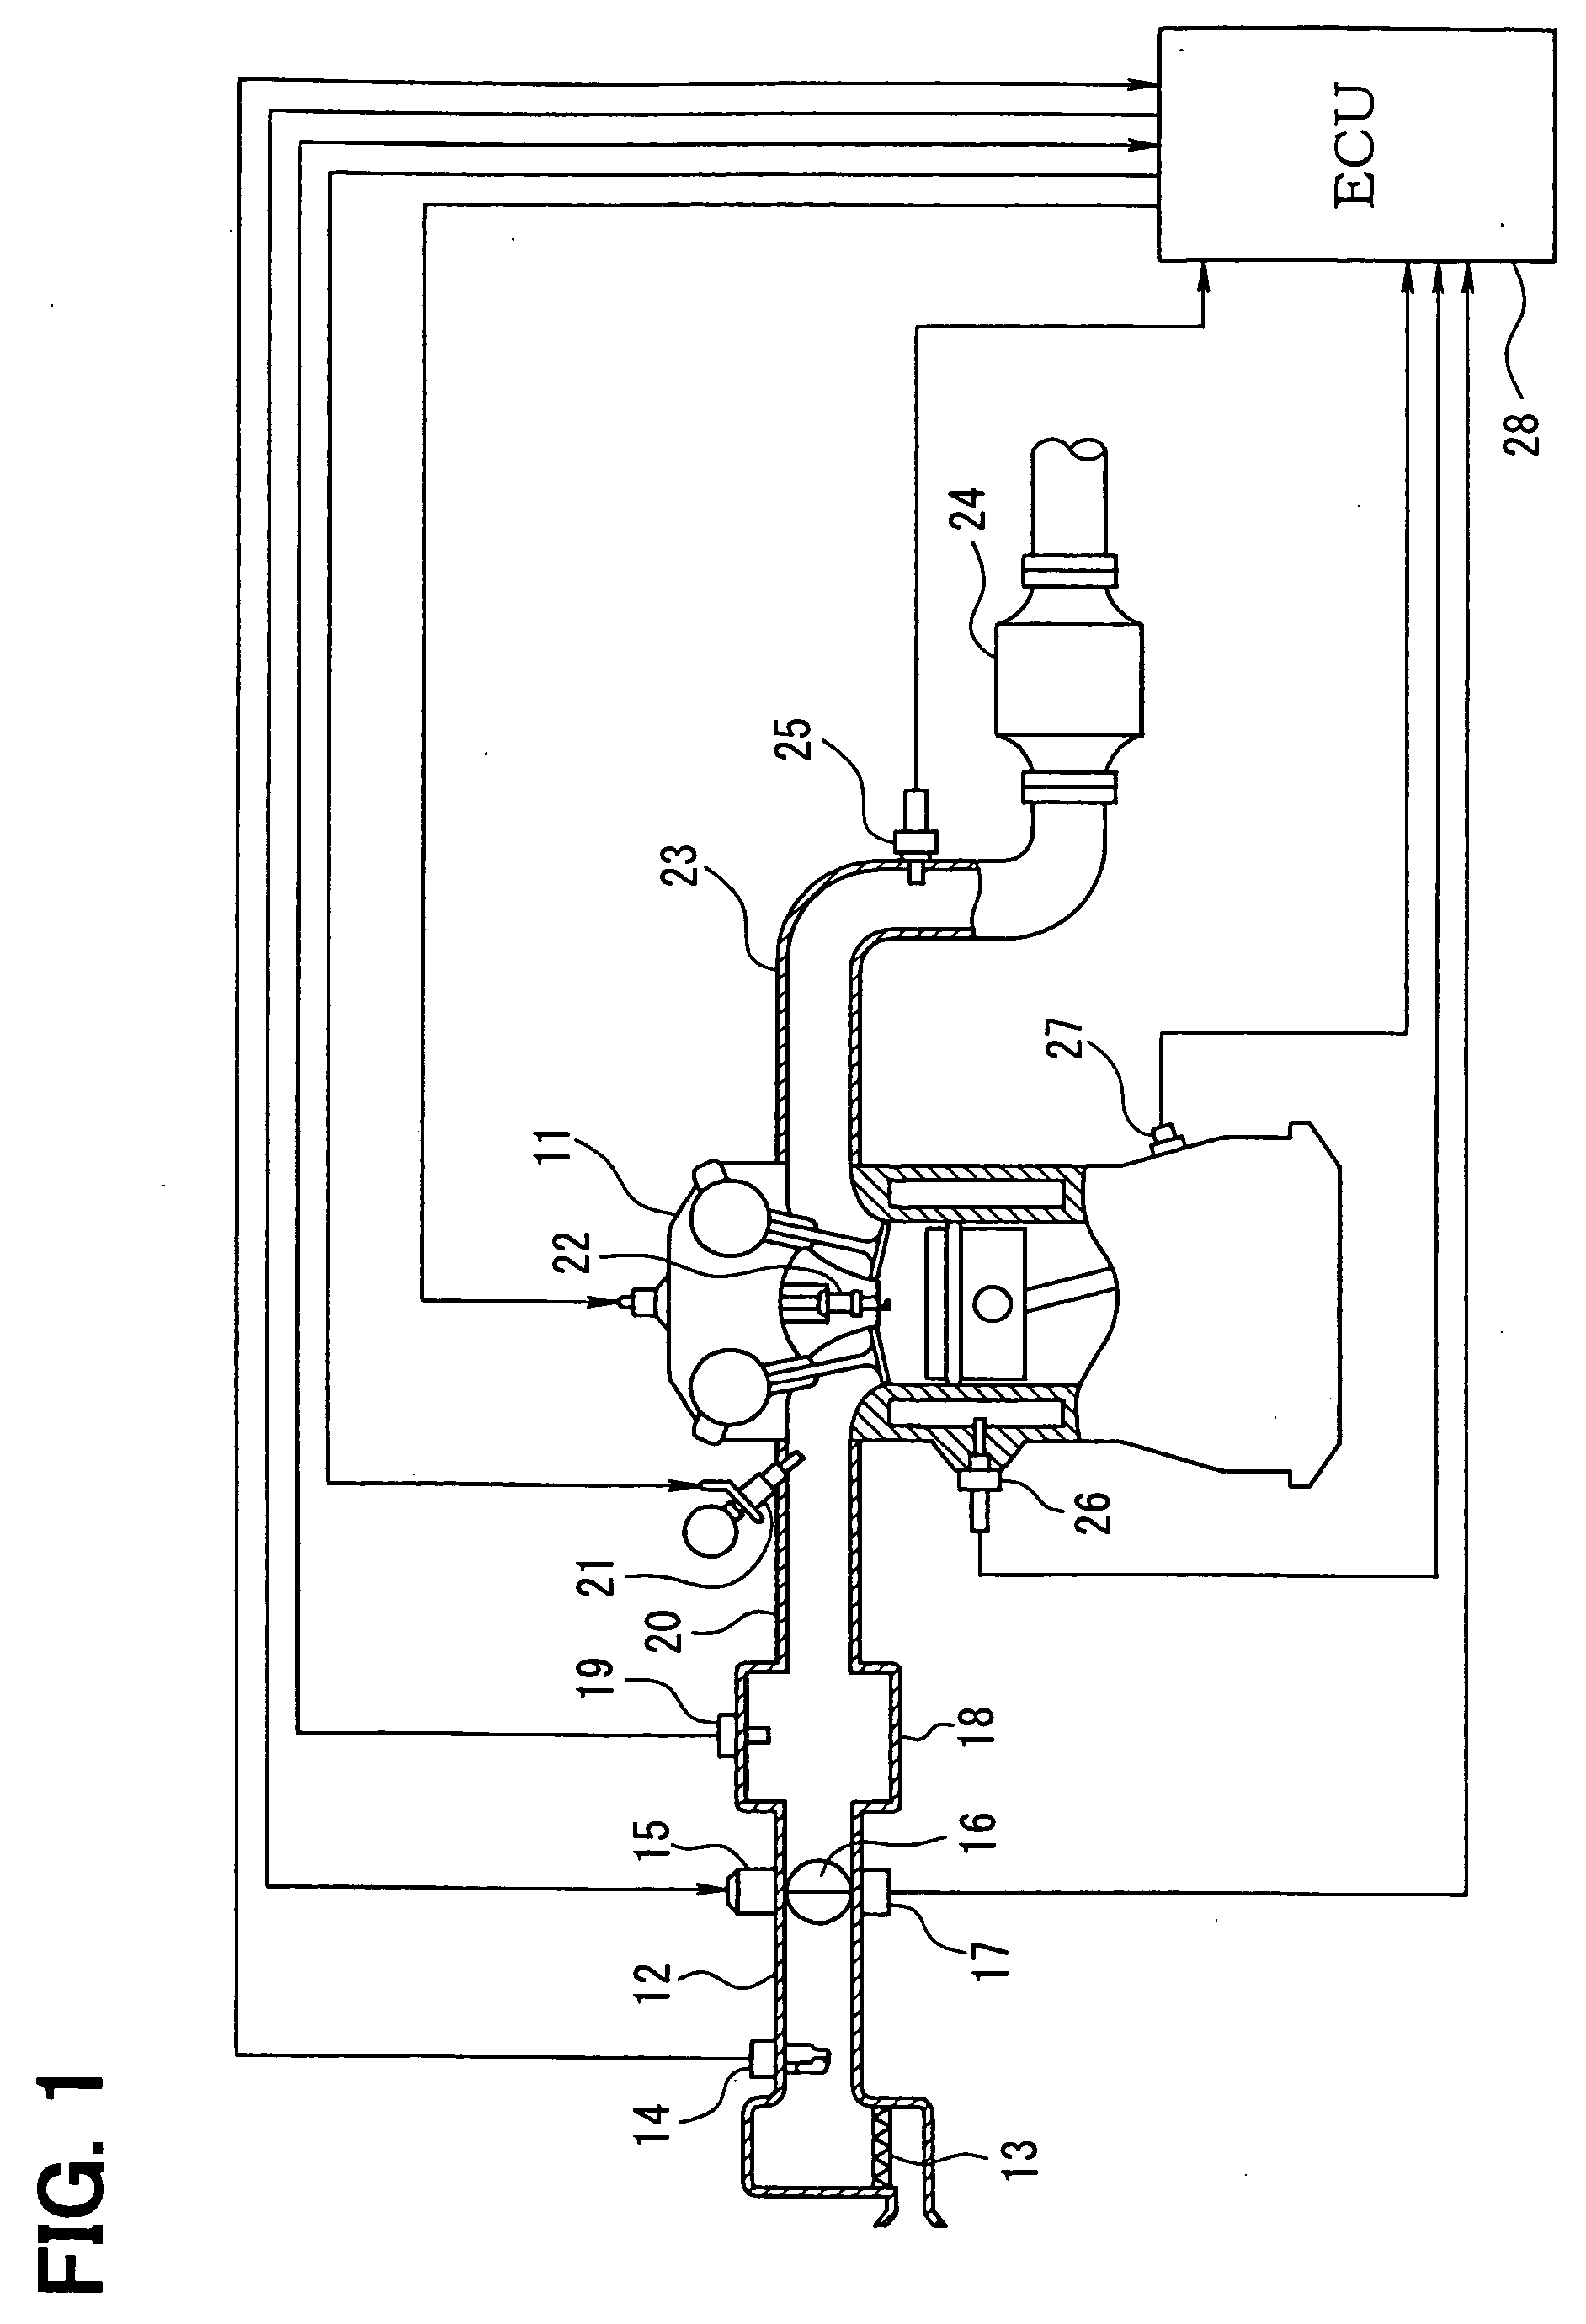 Torque controller for internal combustion engine